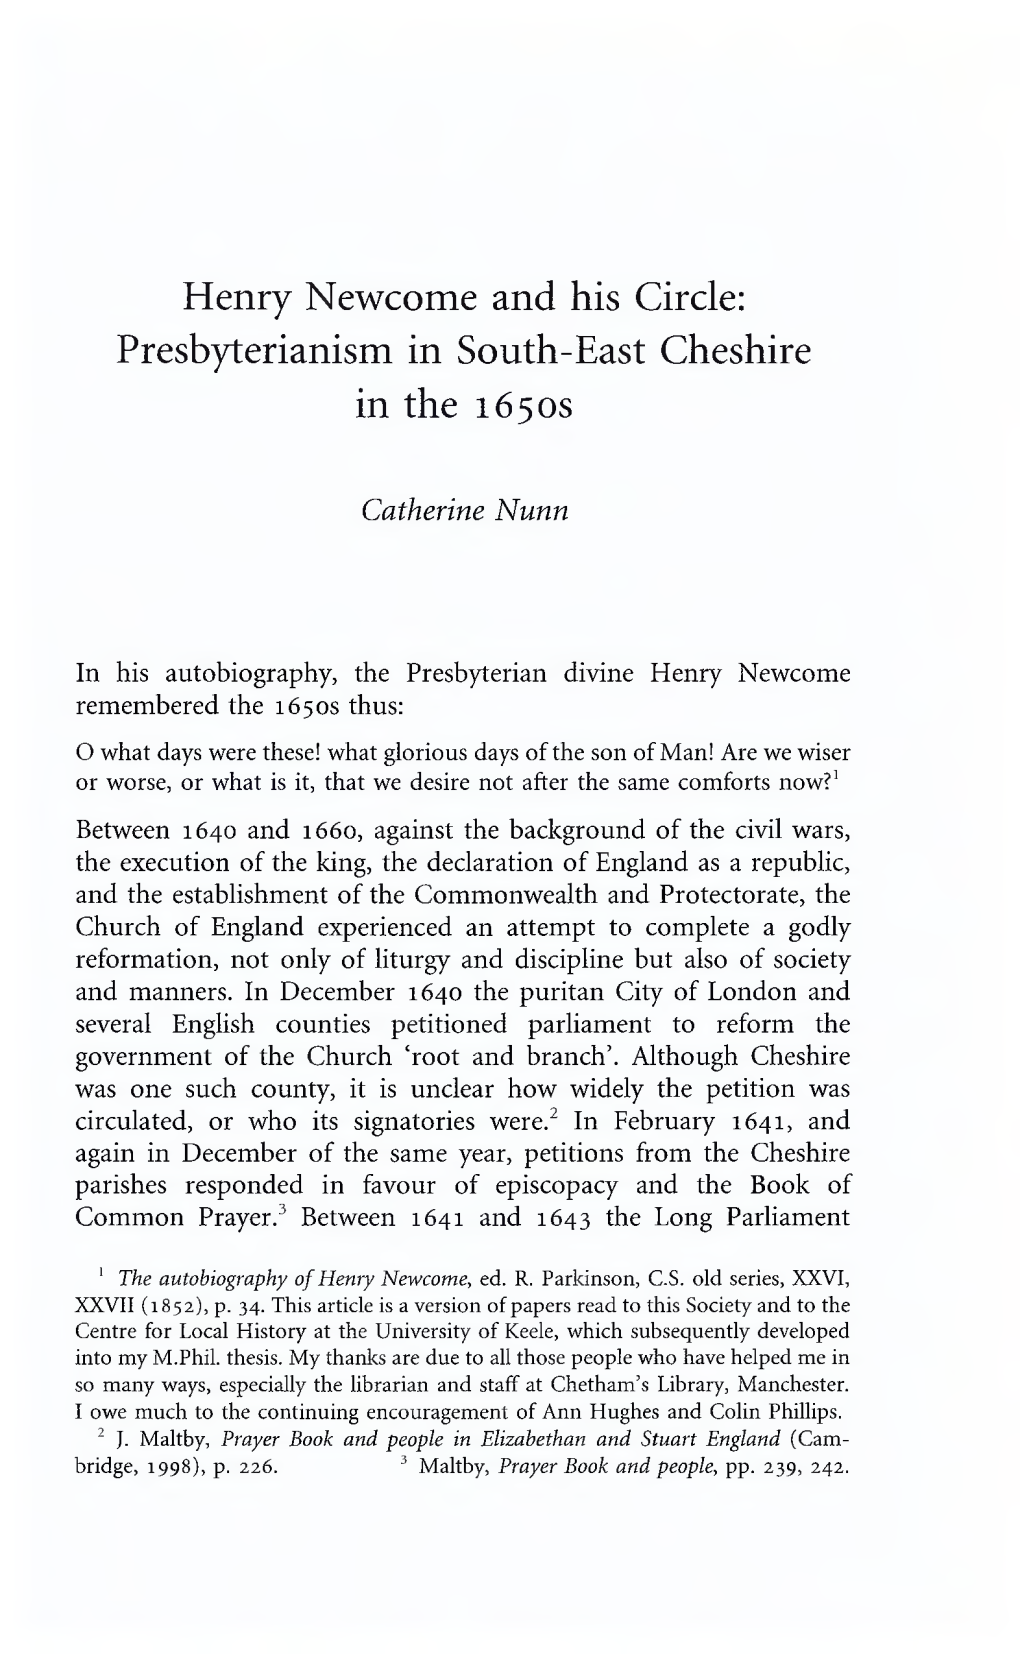 Henry Newcome and His Circle: Presbyterianism in South-East Cheshire in the 1650S